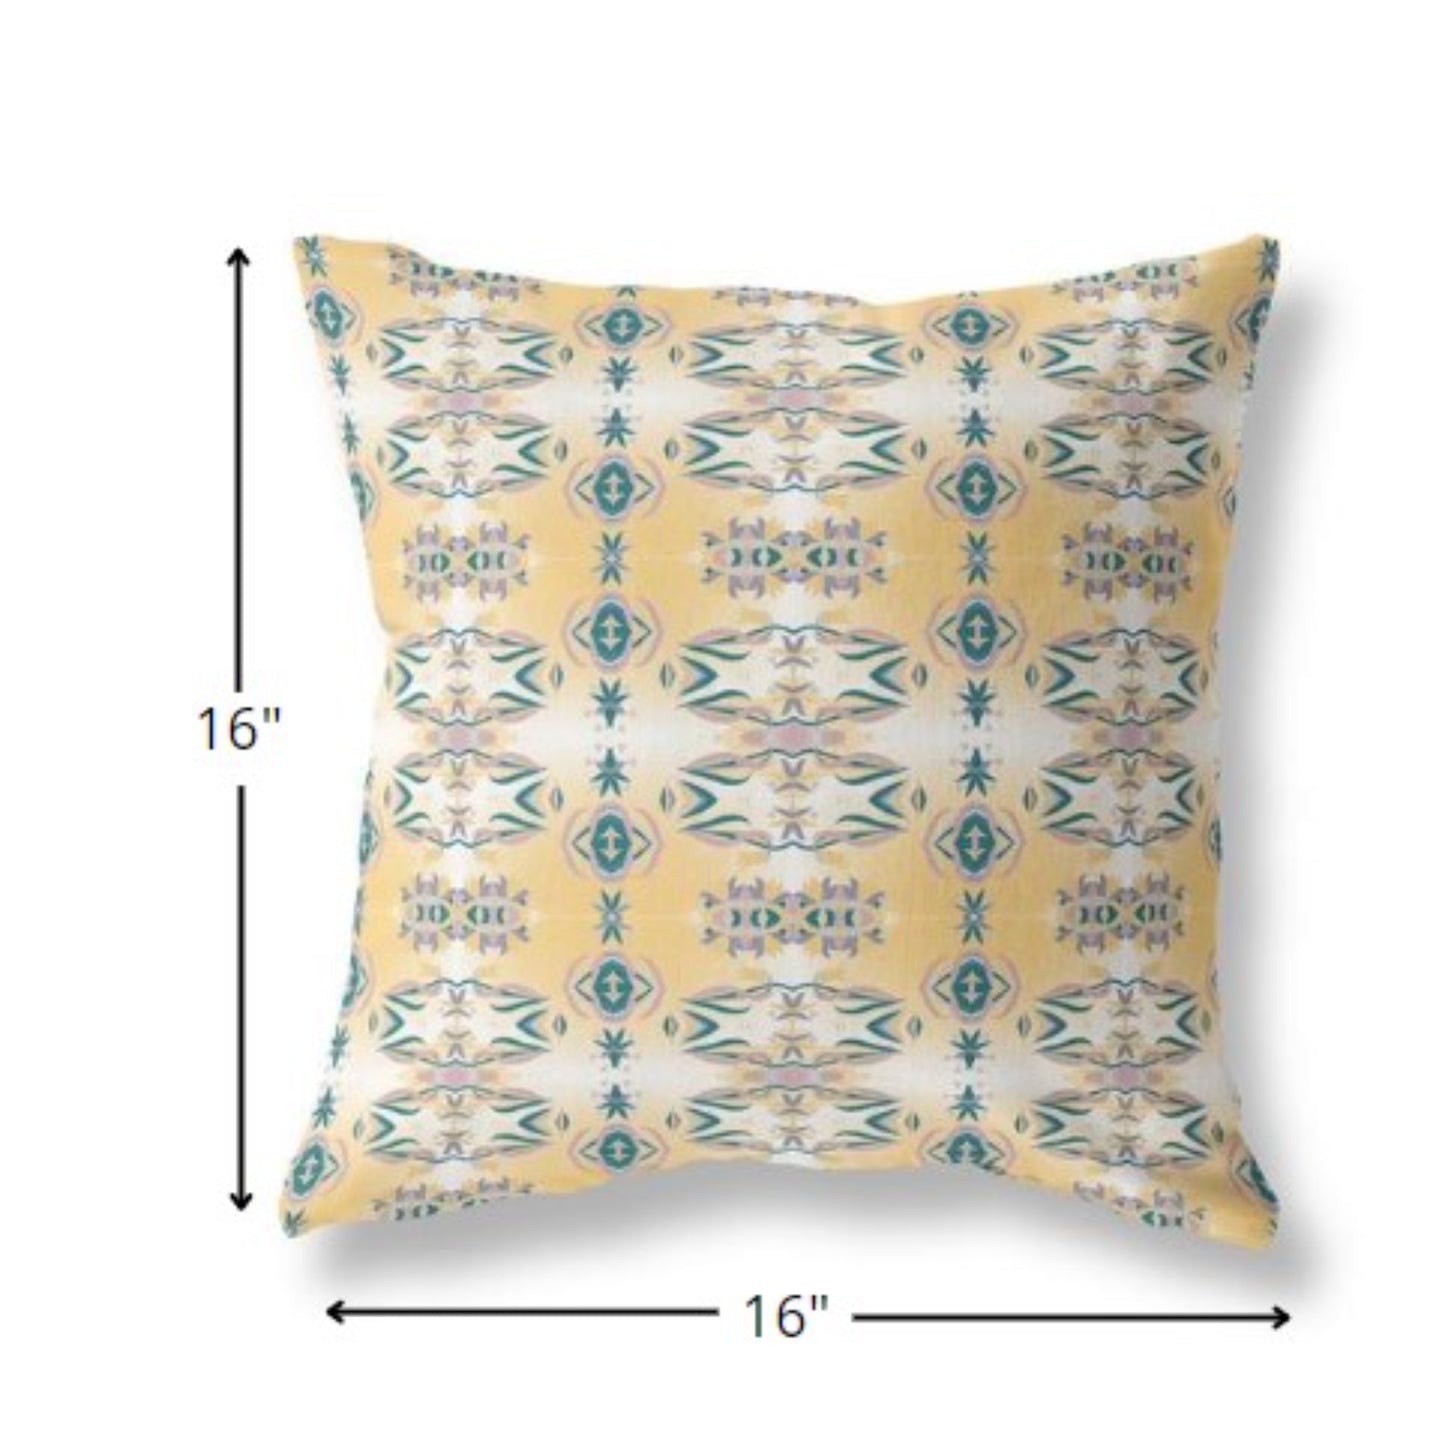 16” Tan Blue Patterned Indoor Outdoor Zippered Throw Pillow